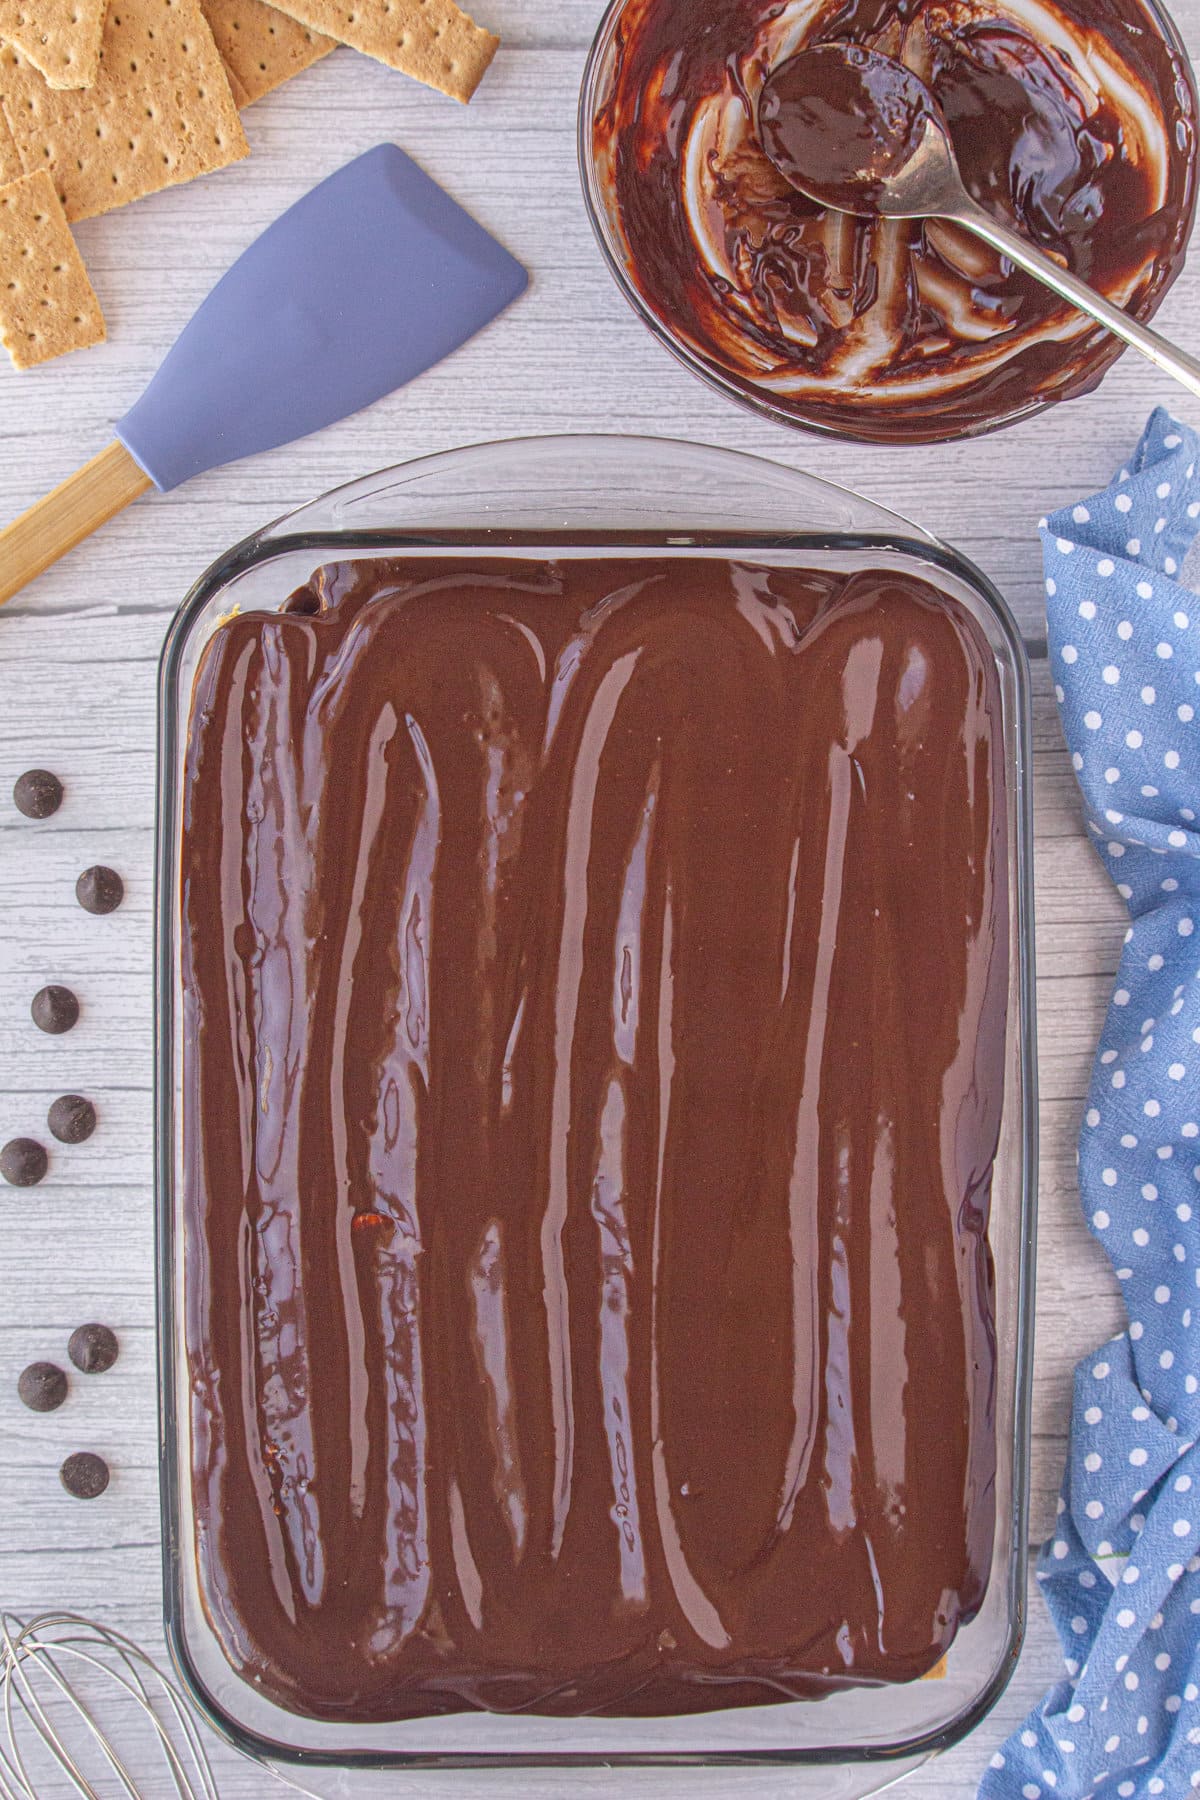 Ganache spread over top of the eclair cake.